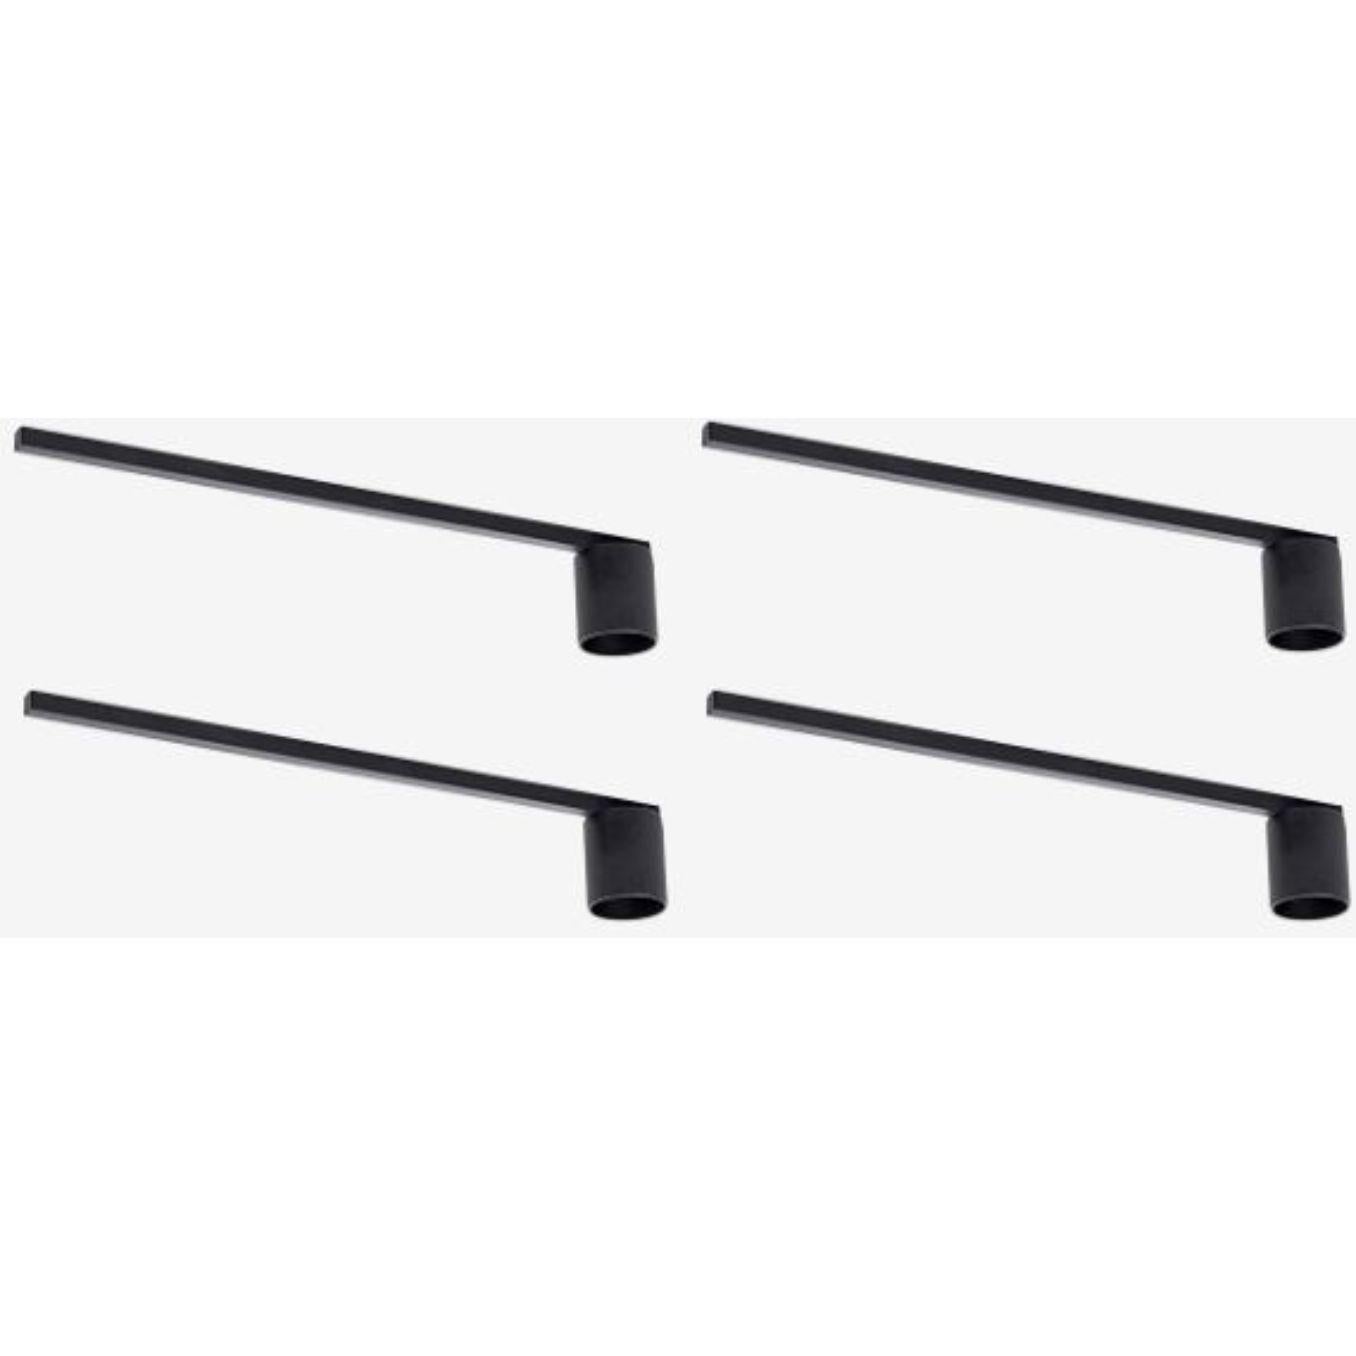 Set of 4 Kubus snuffer by Lassen
Dimensions: D 21 x W 2.50 x H 3.50 cm 
Materials: Metal 
Weight: 0.33 Kg

With reference to the iconic Kubus candleholders, the Kubus Snuffer in black is an essential addition to the collection. Avoid drips and